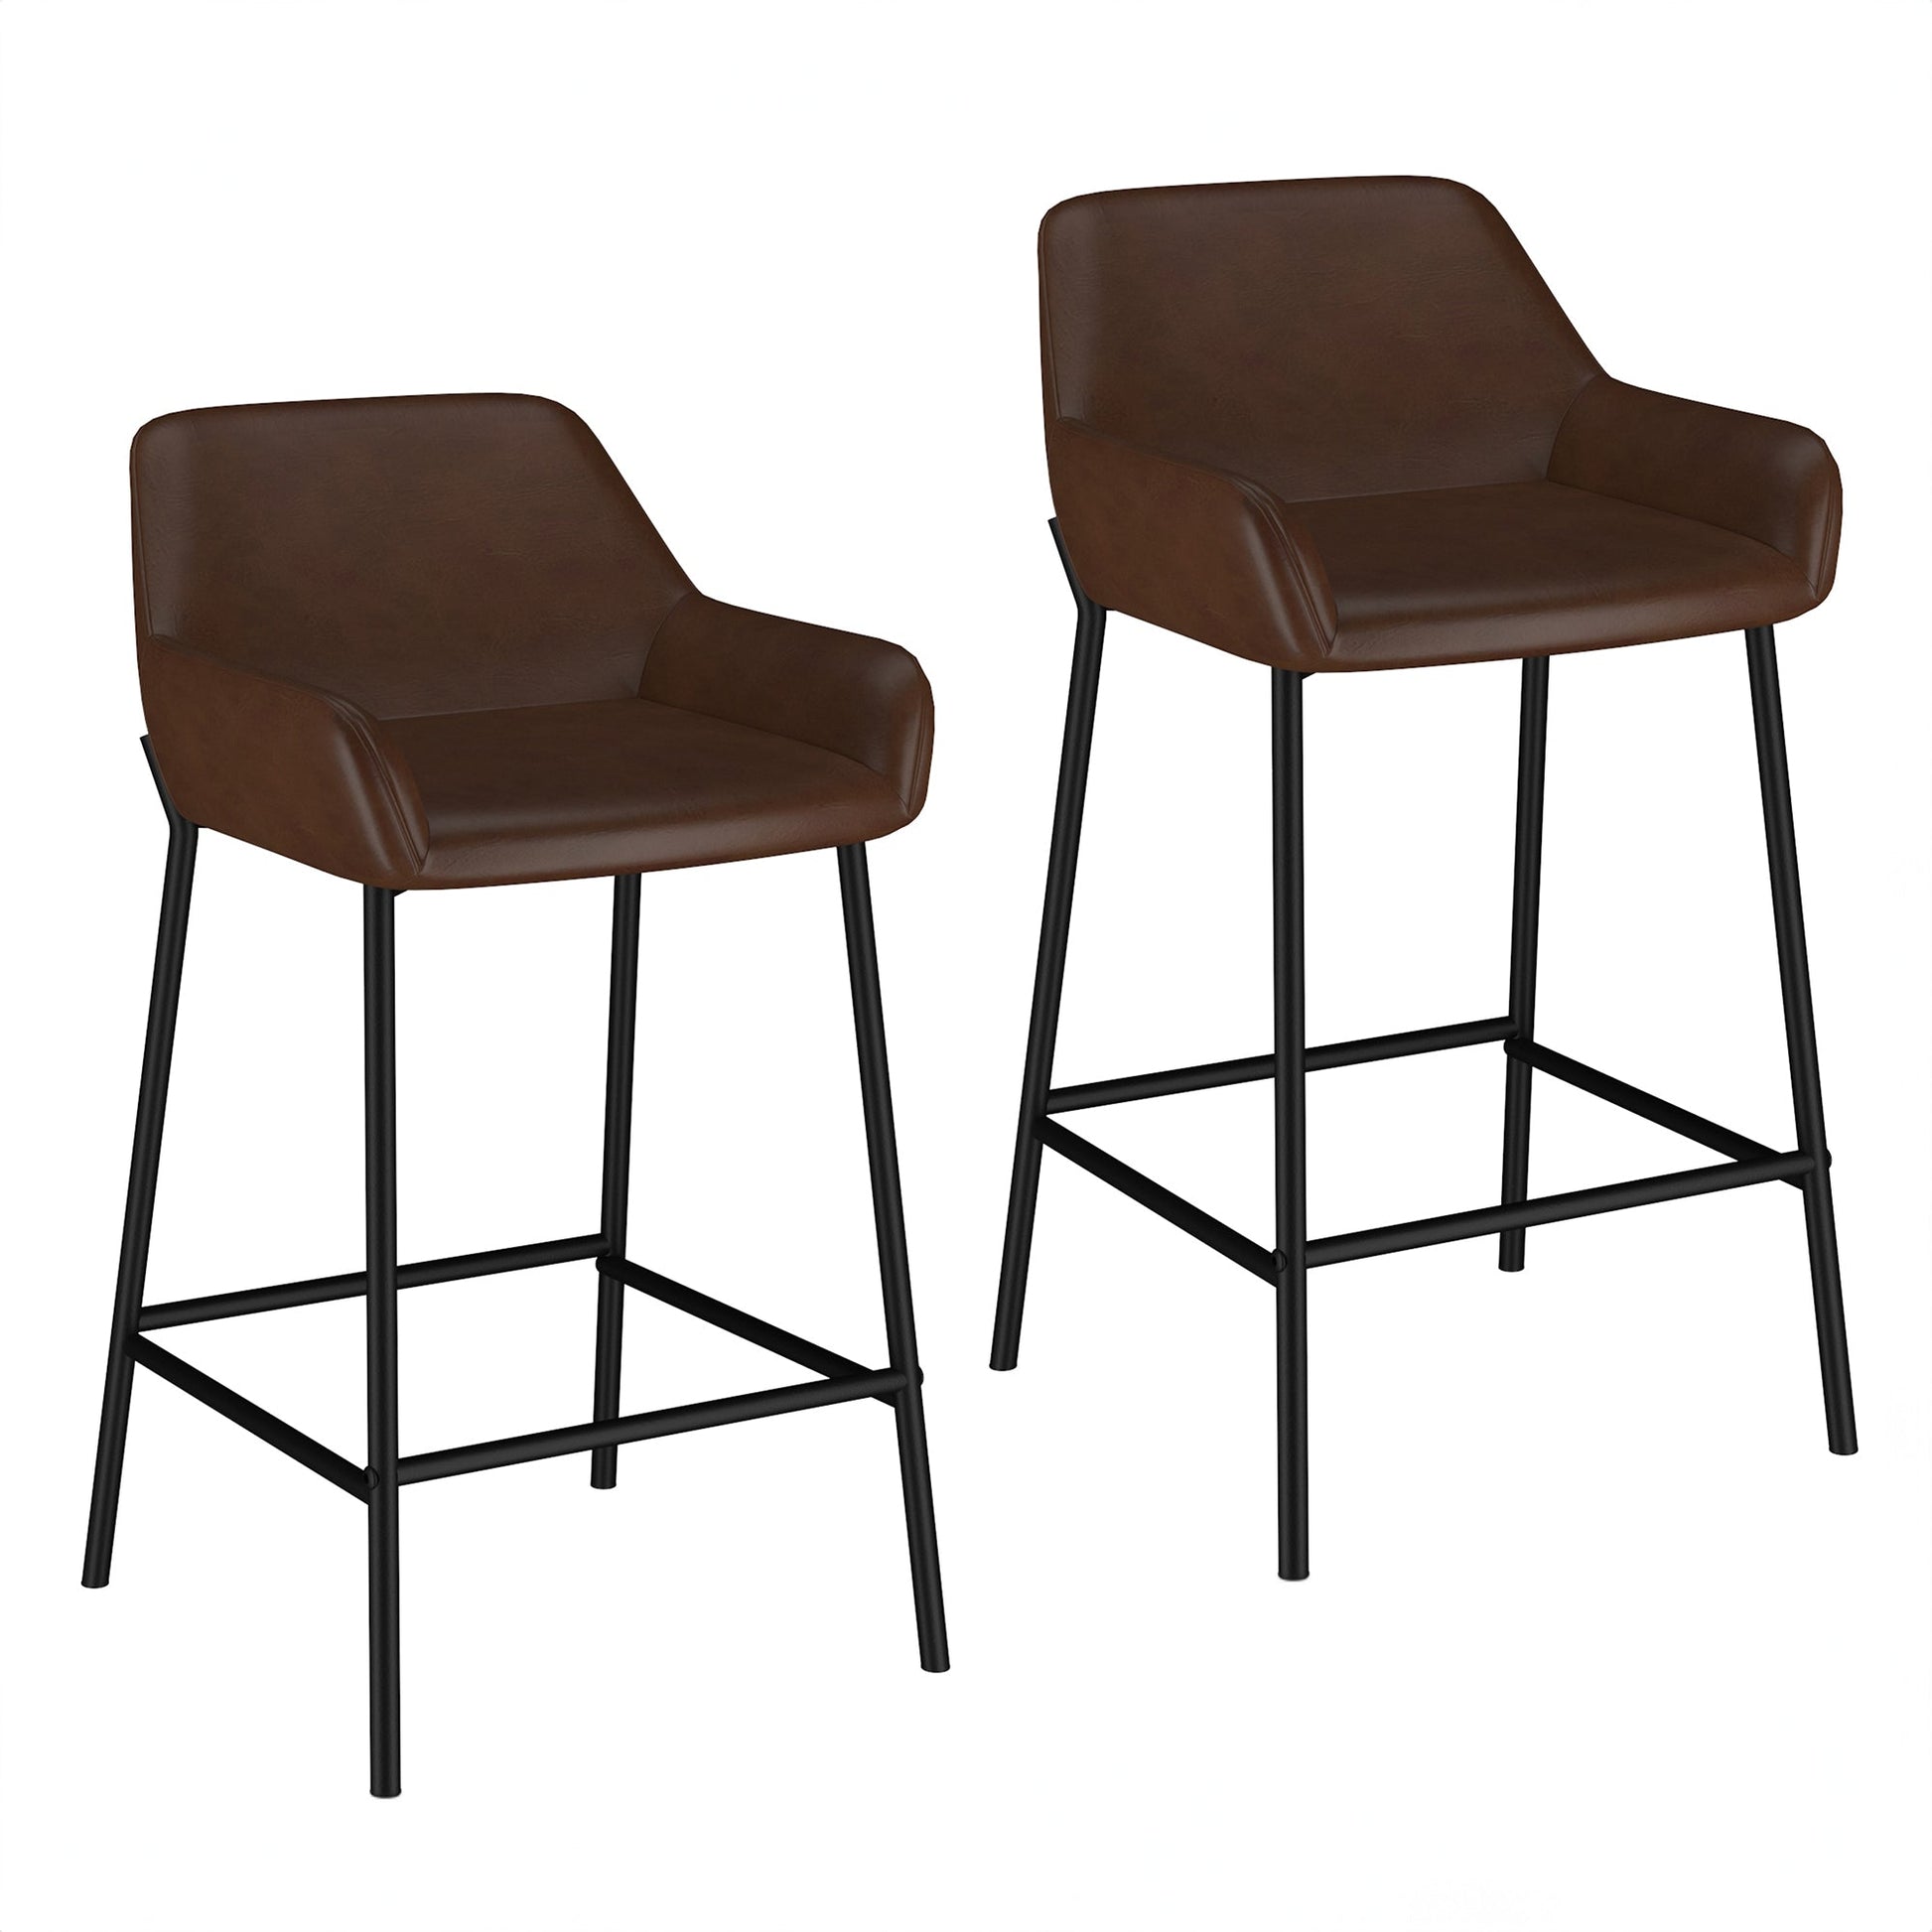 26" Counter Stool | Set of 2 | Baily Brown and Black - Your Bar Stools Canada